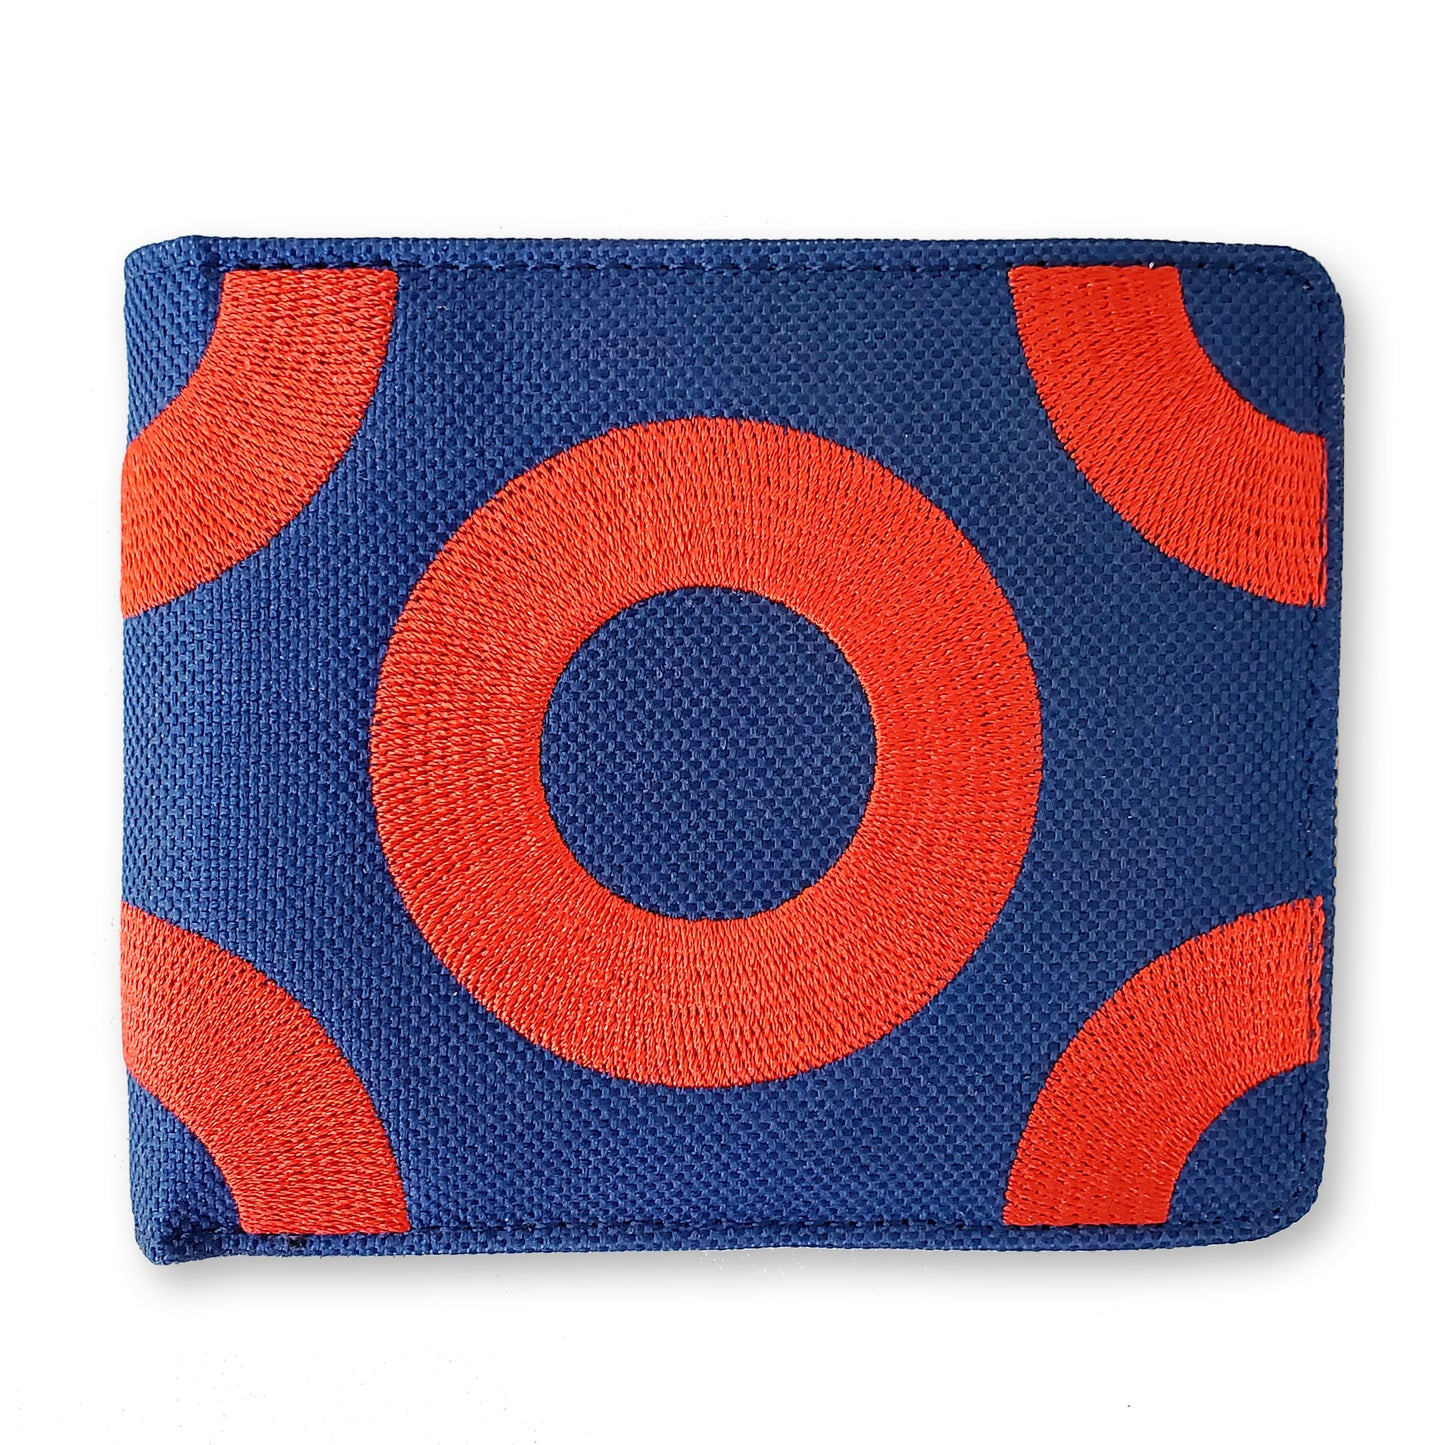 Fishman Donut Embroidery Bifold Wallet